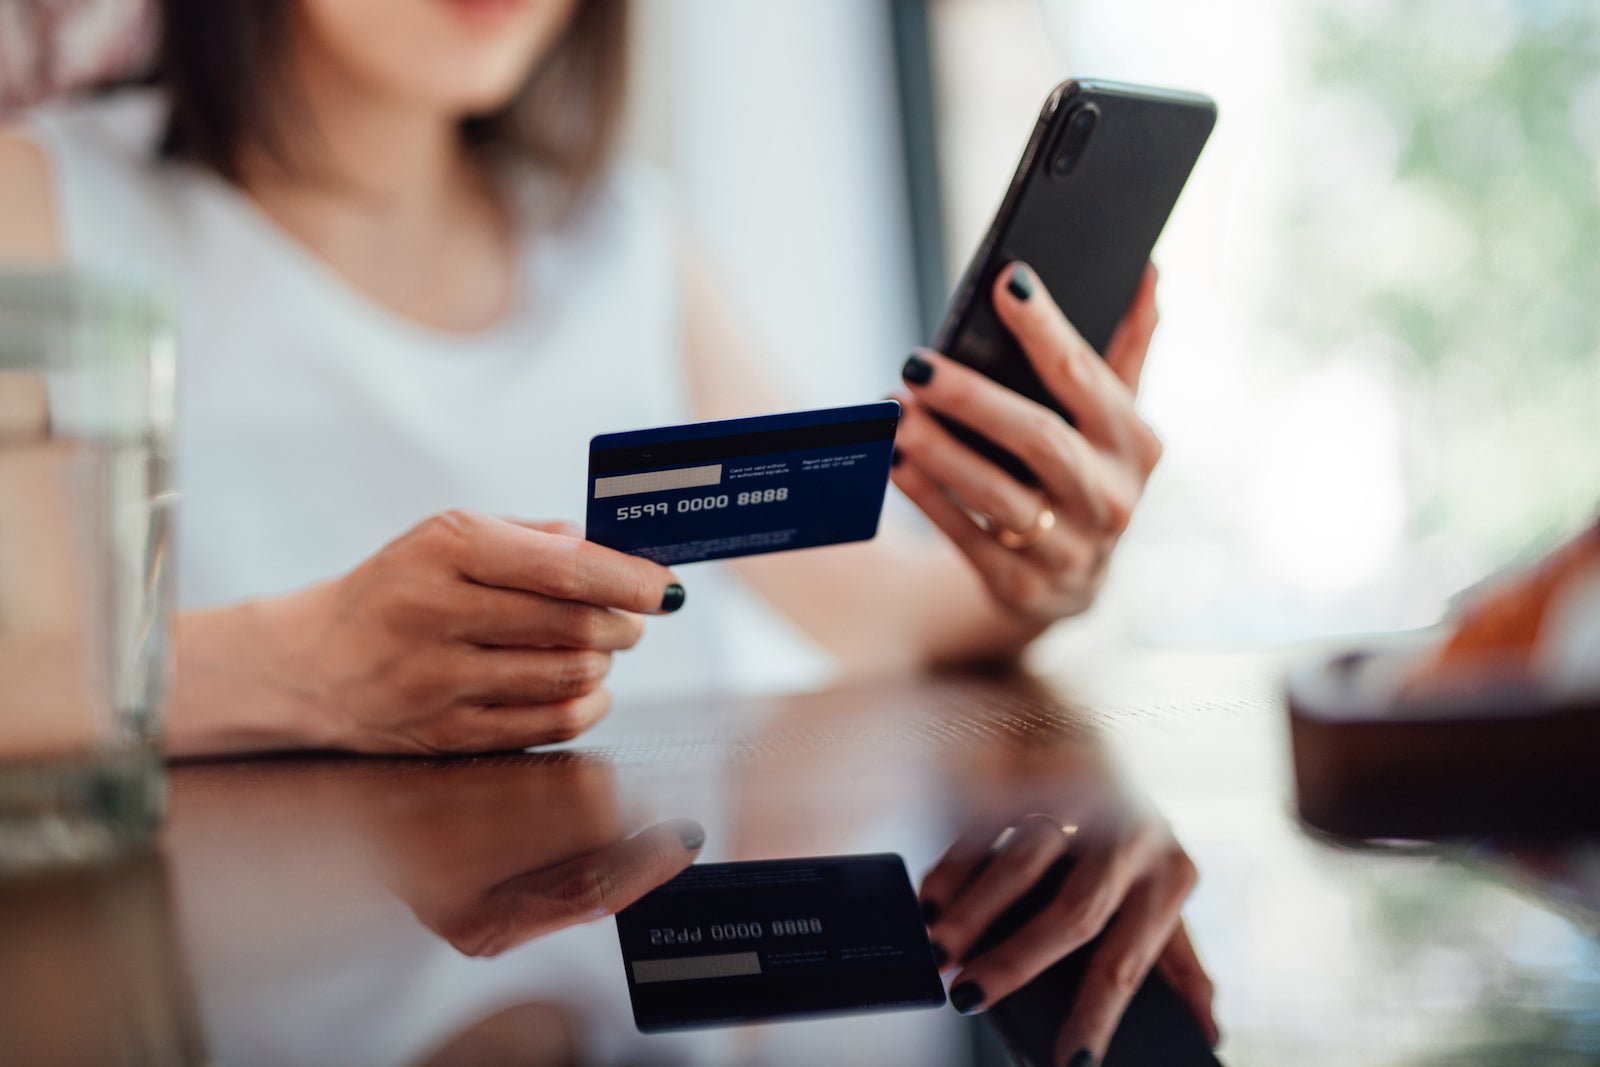 a person looks at a smartphone while holding a credit card